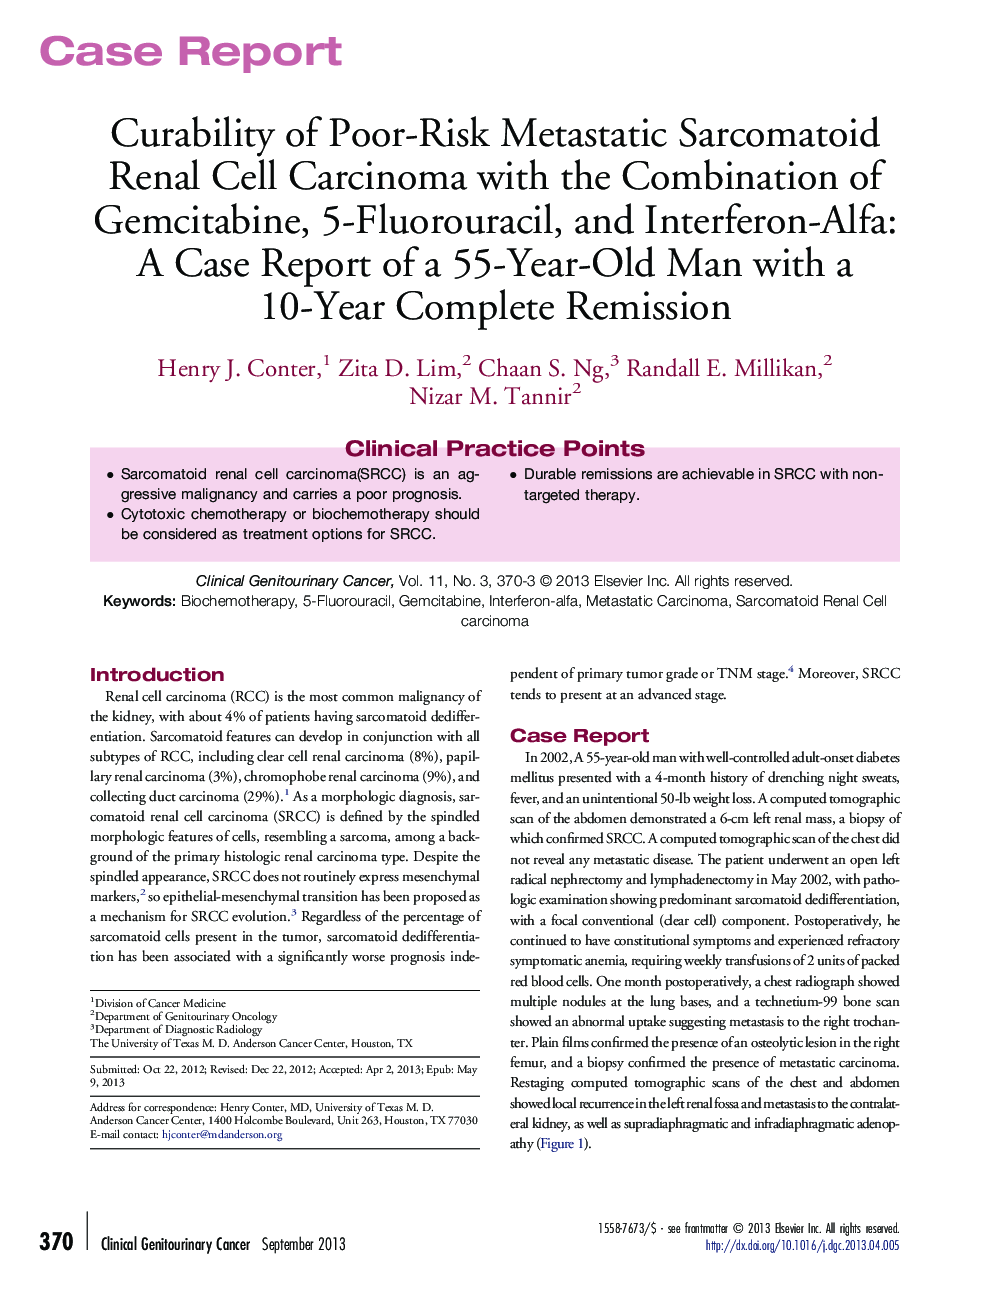 Curability of Poor-Risk Metastatic Sarcomatoid Renal Cell Carcinoma with the Combination of Gemcitabine, 5-Fluorouracil, and Interferon-Alfa: A Case Report of a 55-Year-Old Man with a 10-Year Complete Remission